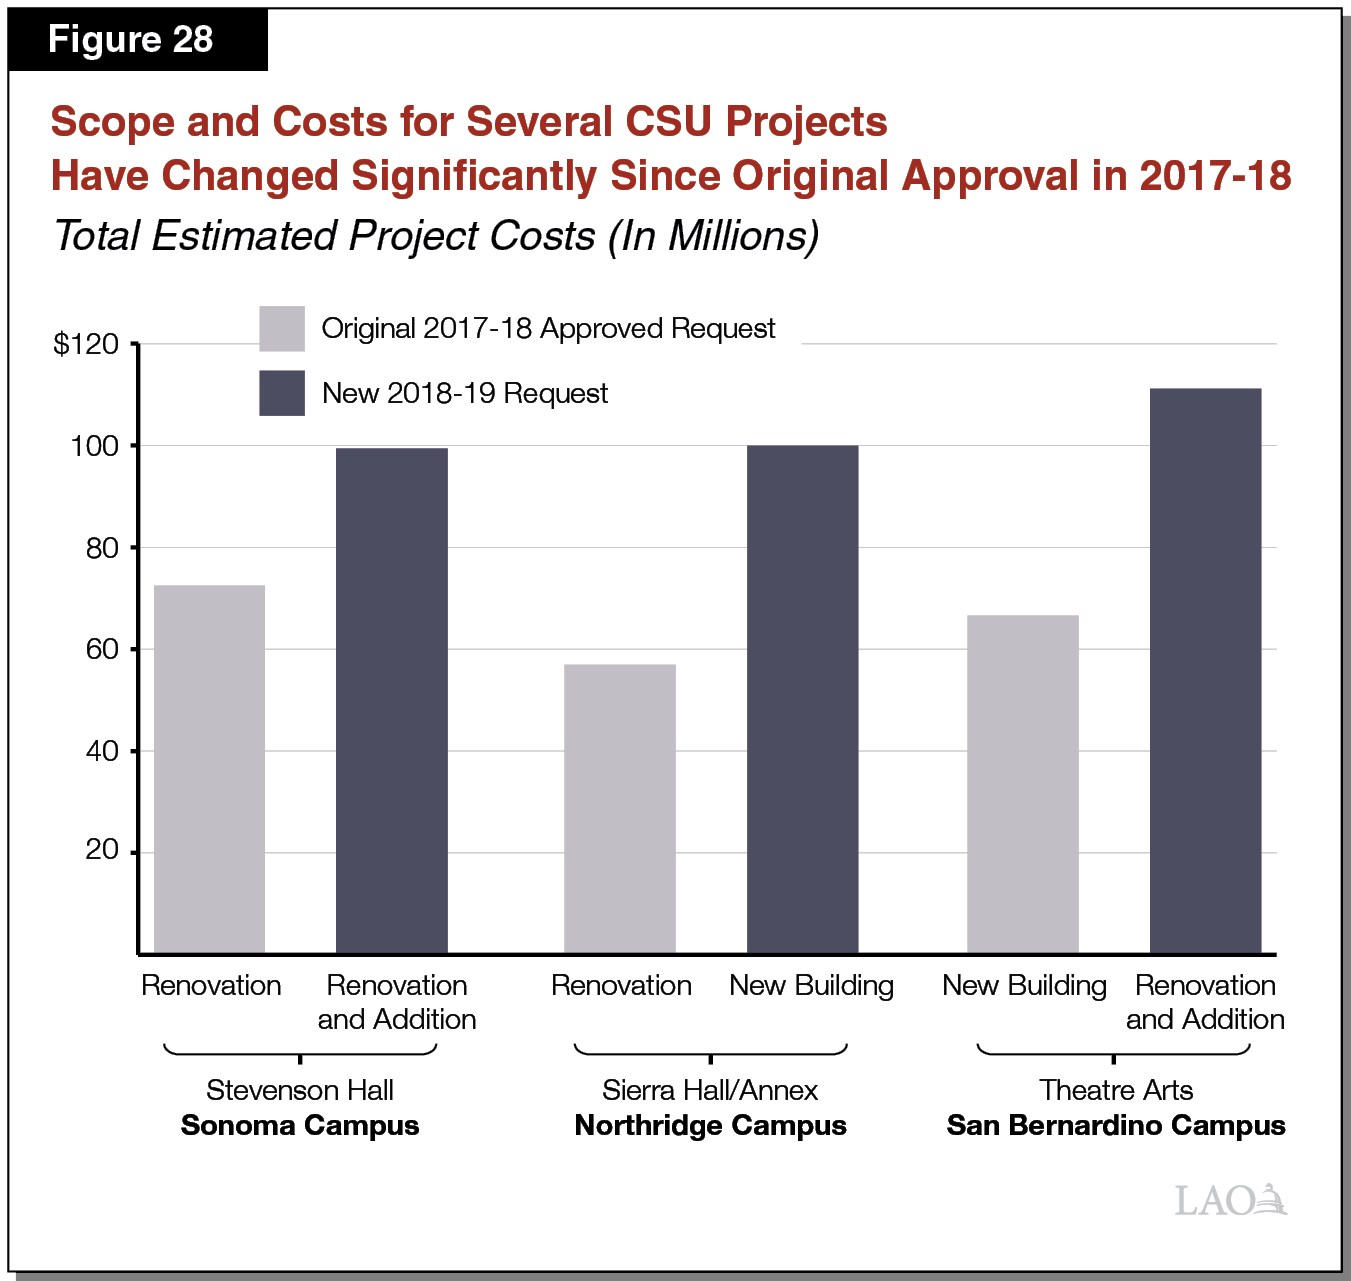 Figure 28 - Scope and Costs for Several CSU Projects Have Changed Significantly Since Initial Approval in 2017-18